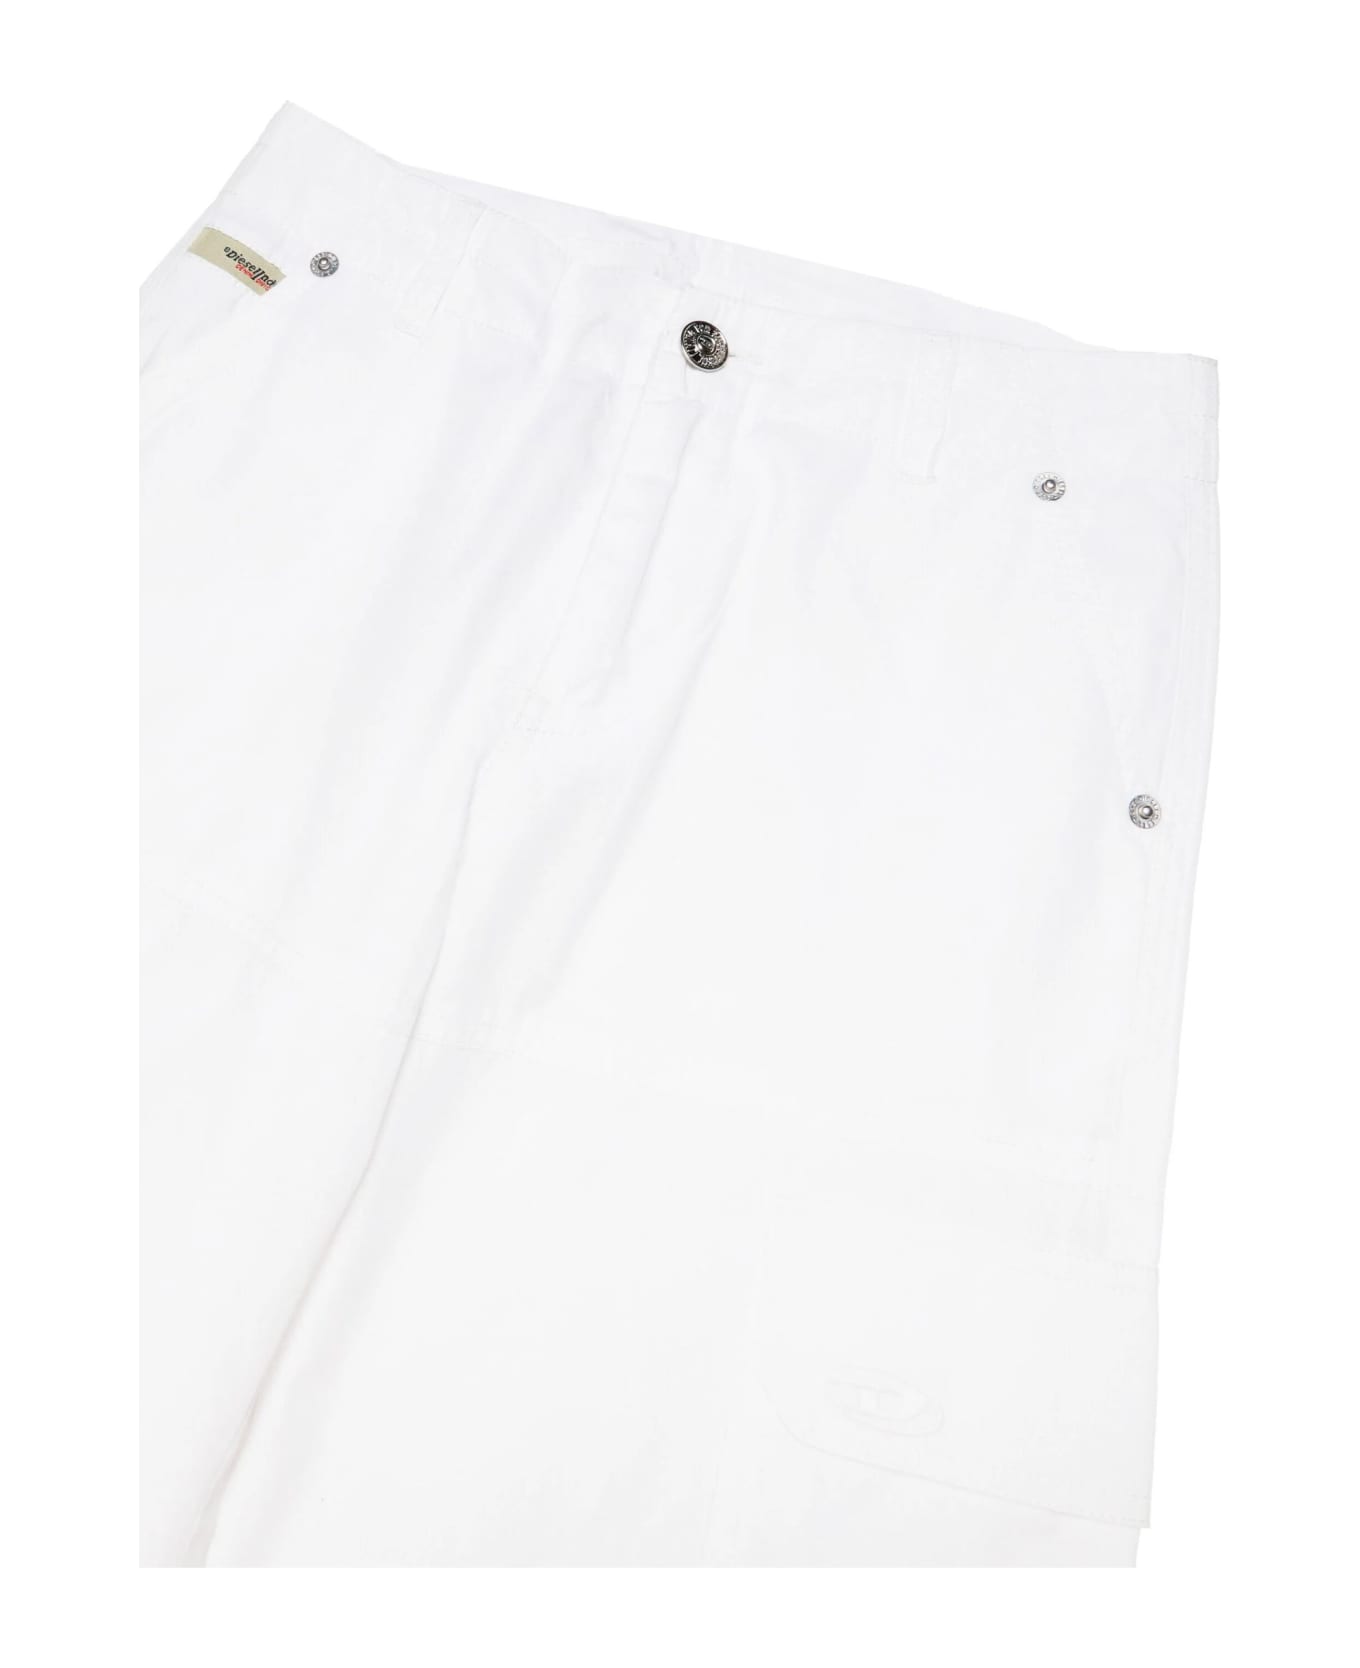 Diesel Trousers White - White ボトムス